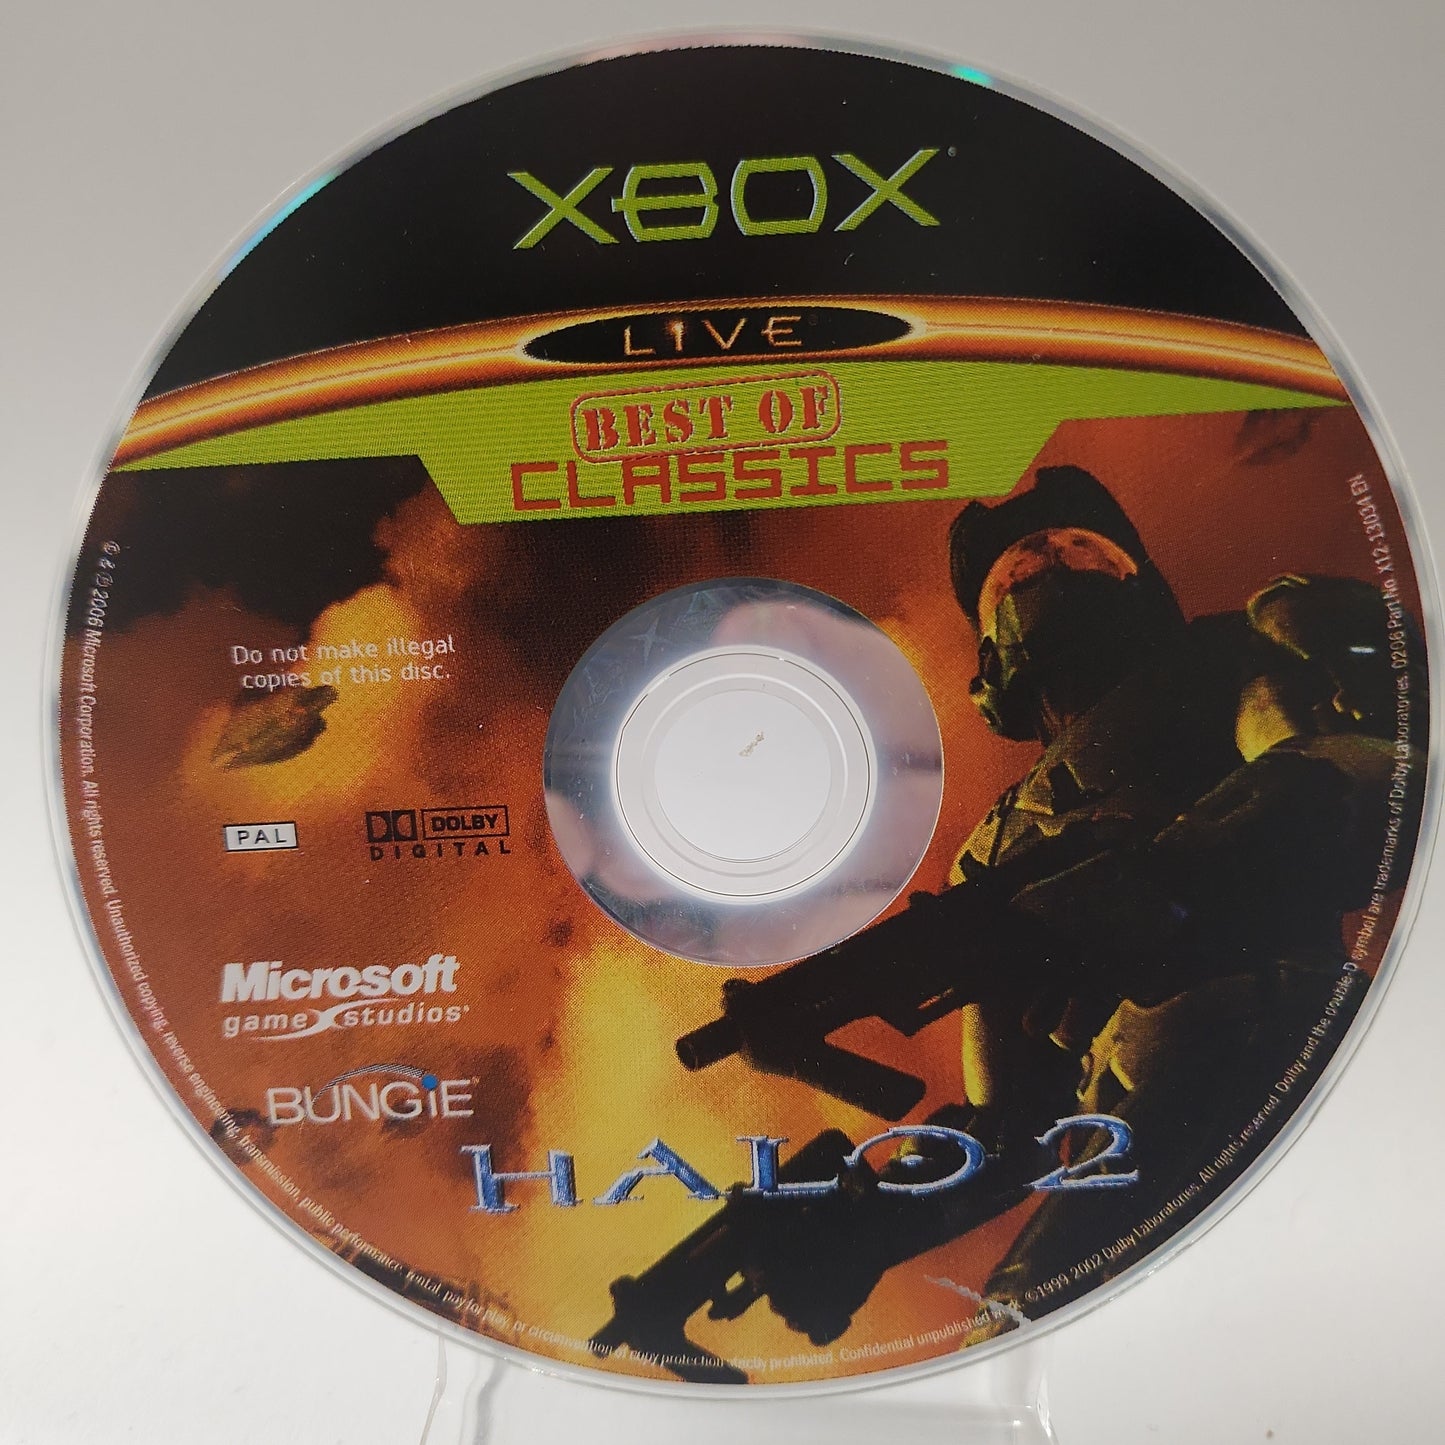 Halo 2 Best of Classics (Disc Only) Xbox Original